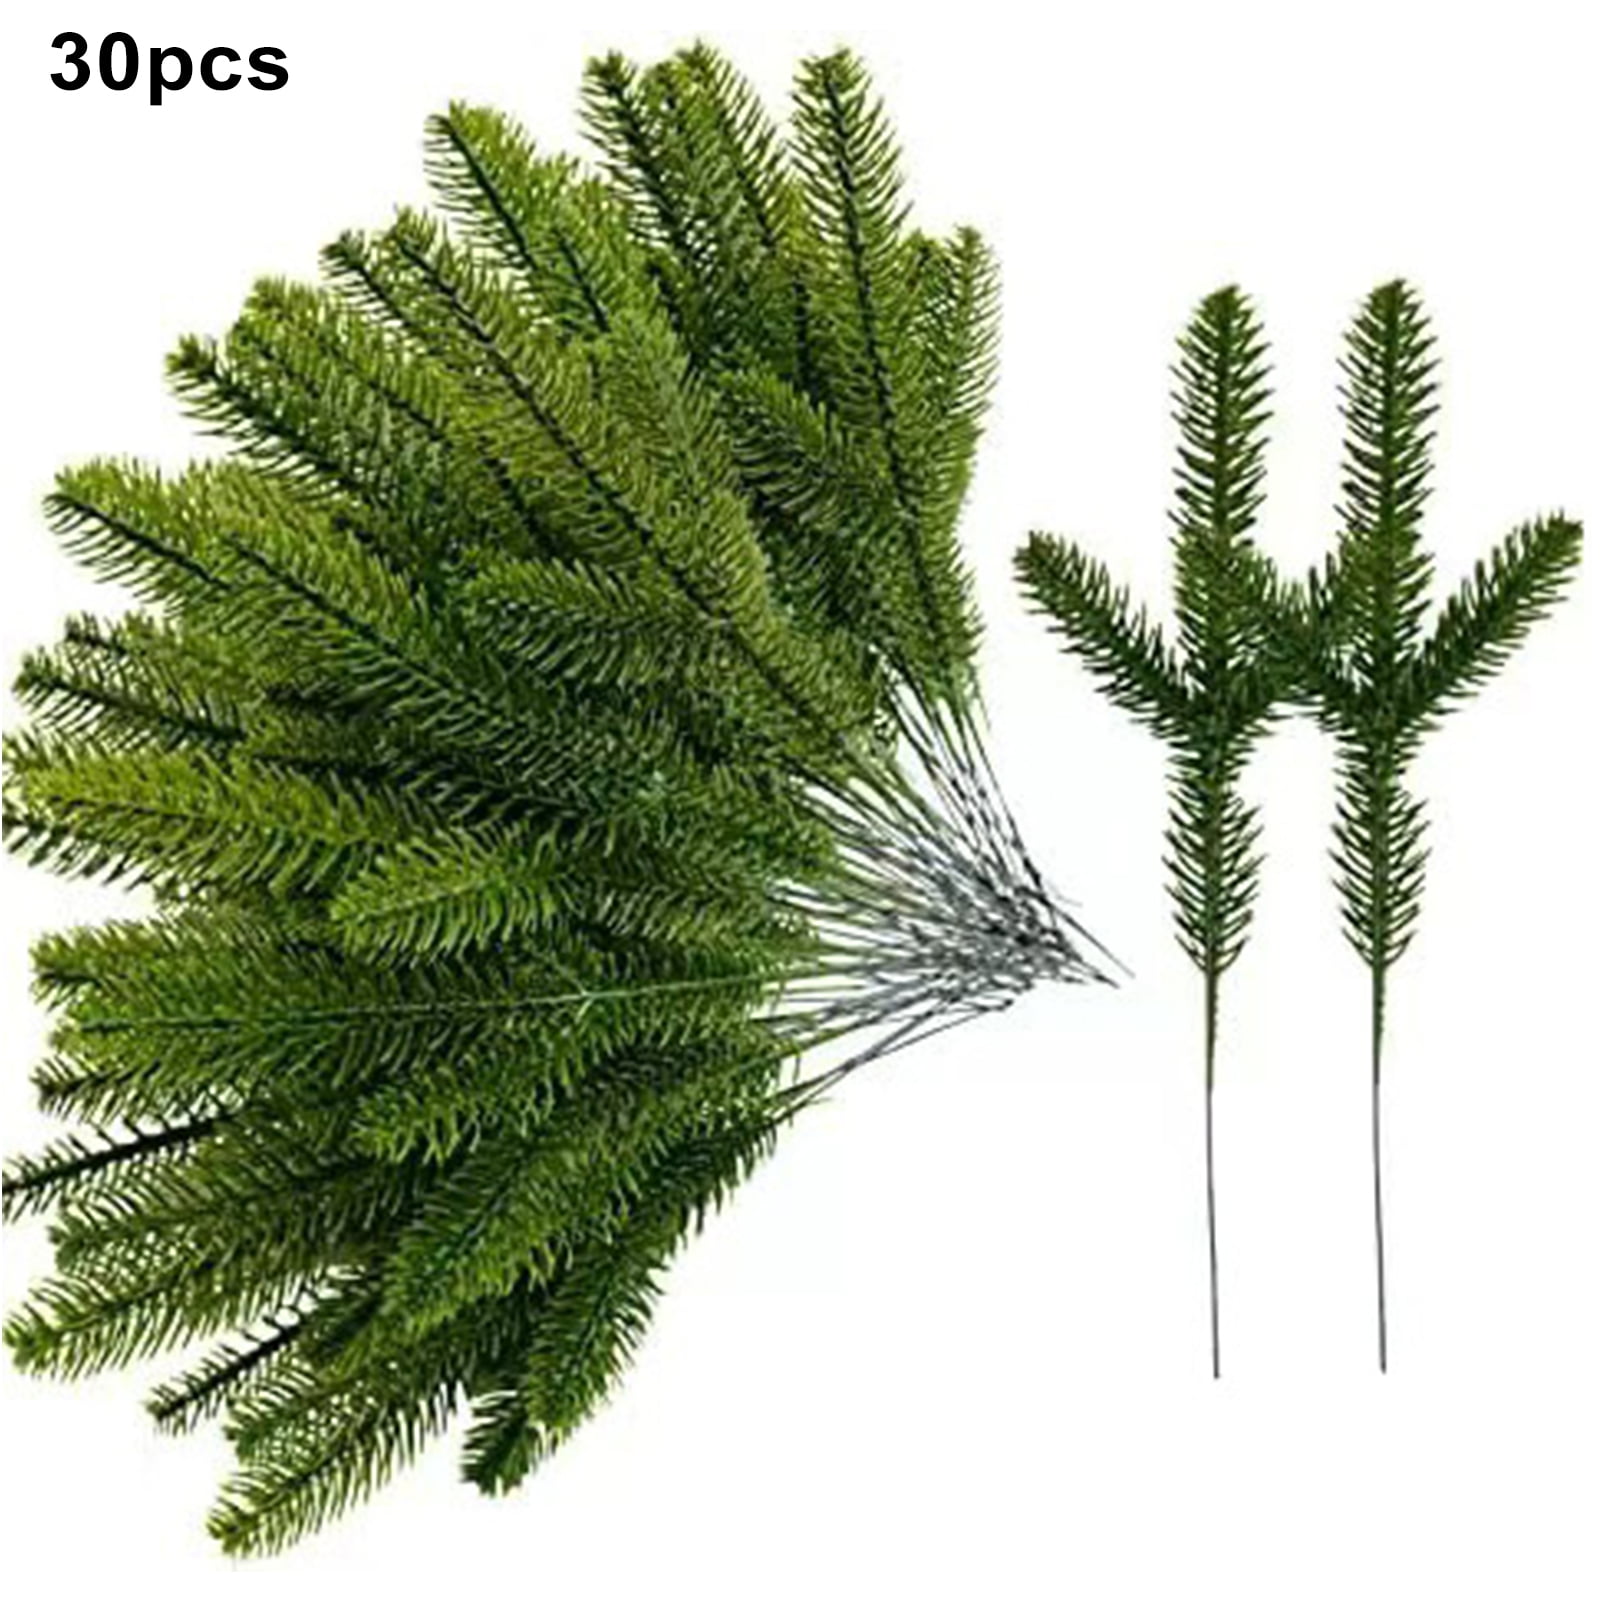 Set of 30 Fresh Cut Pine Branches Real Geen Pine Branches